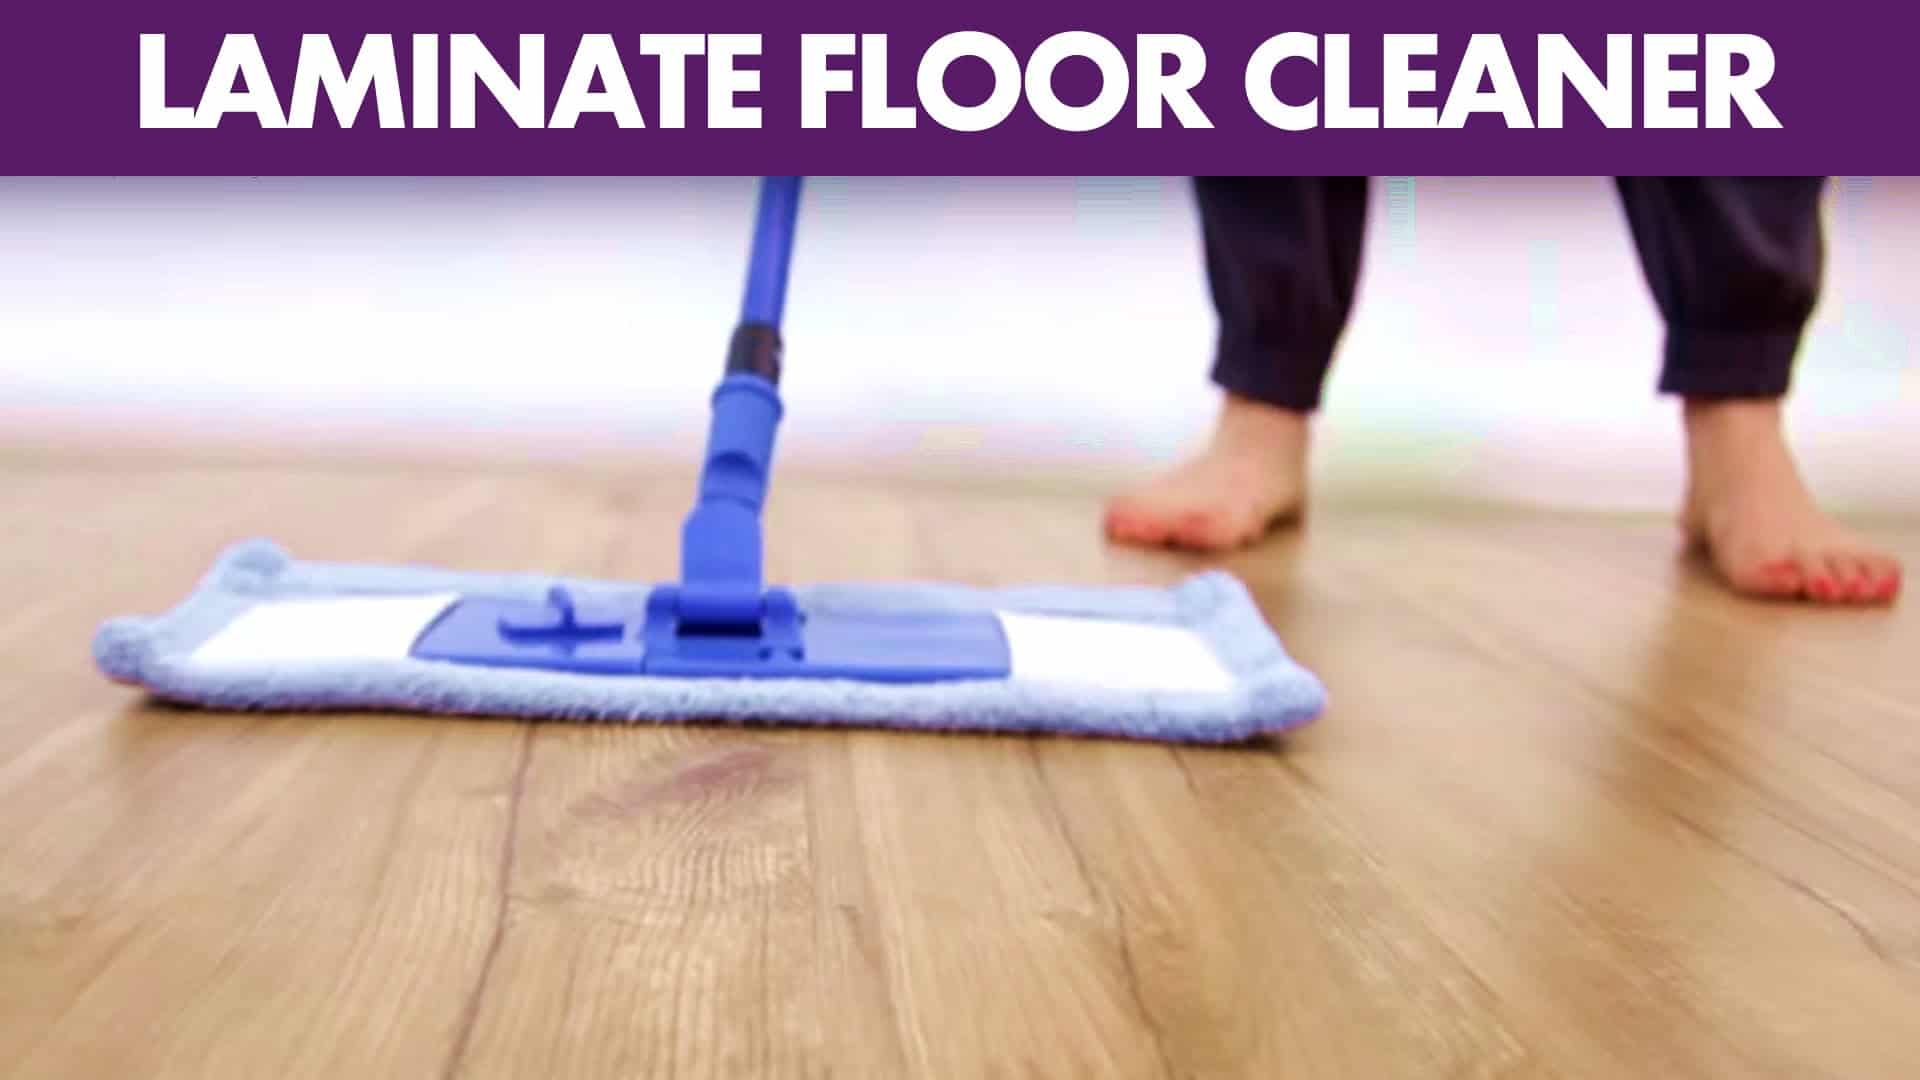 Laminate Floor Cleaner Day 9 31, How To Clean And Polish Laminate Wood Floors